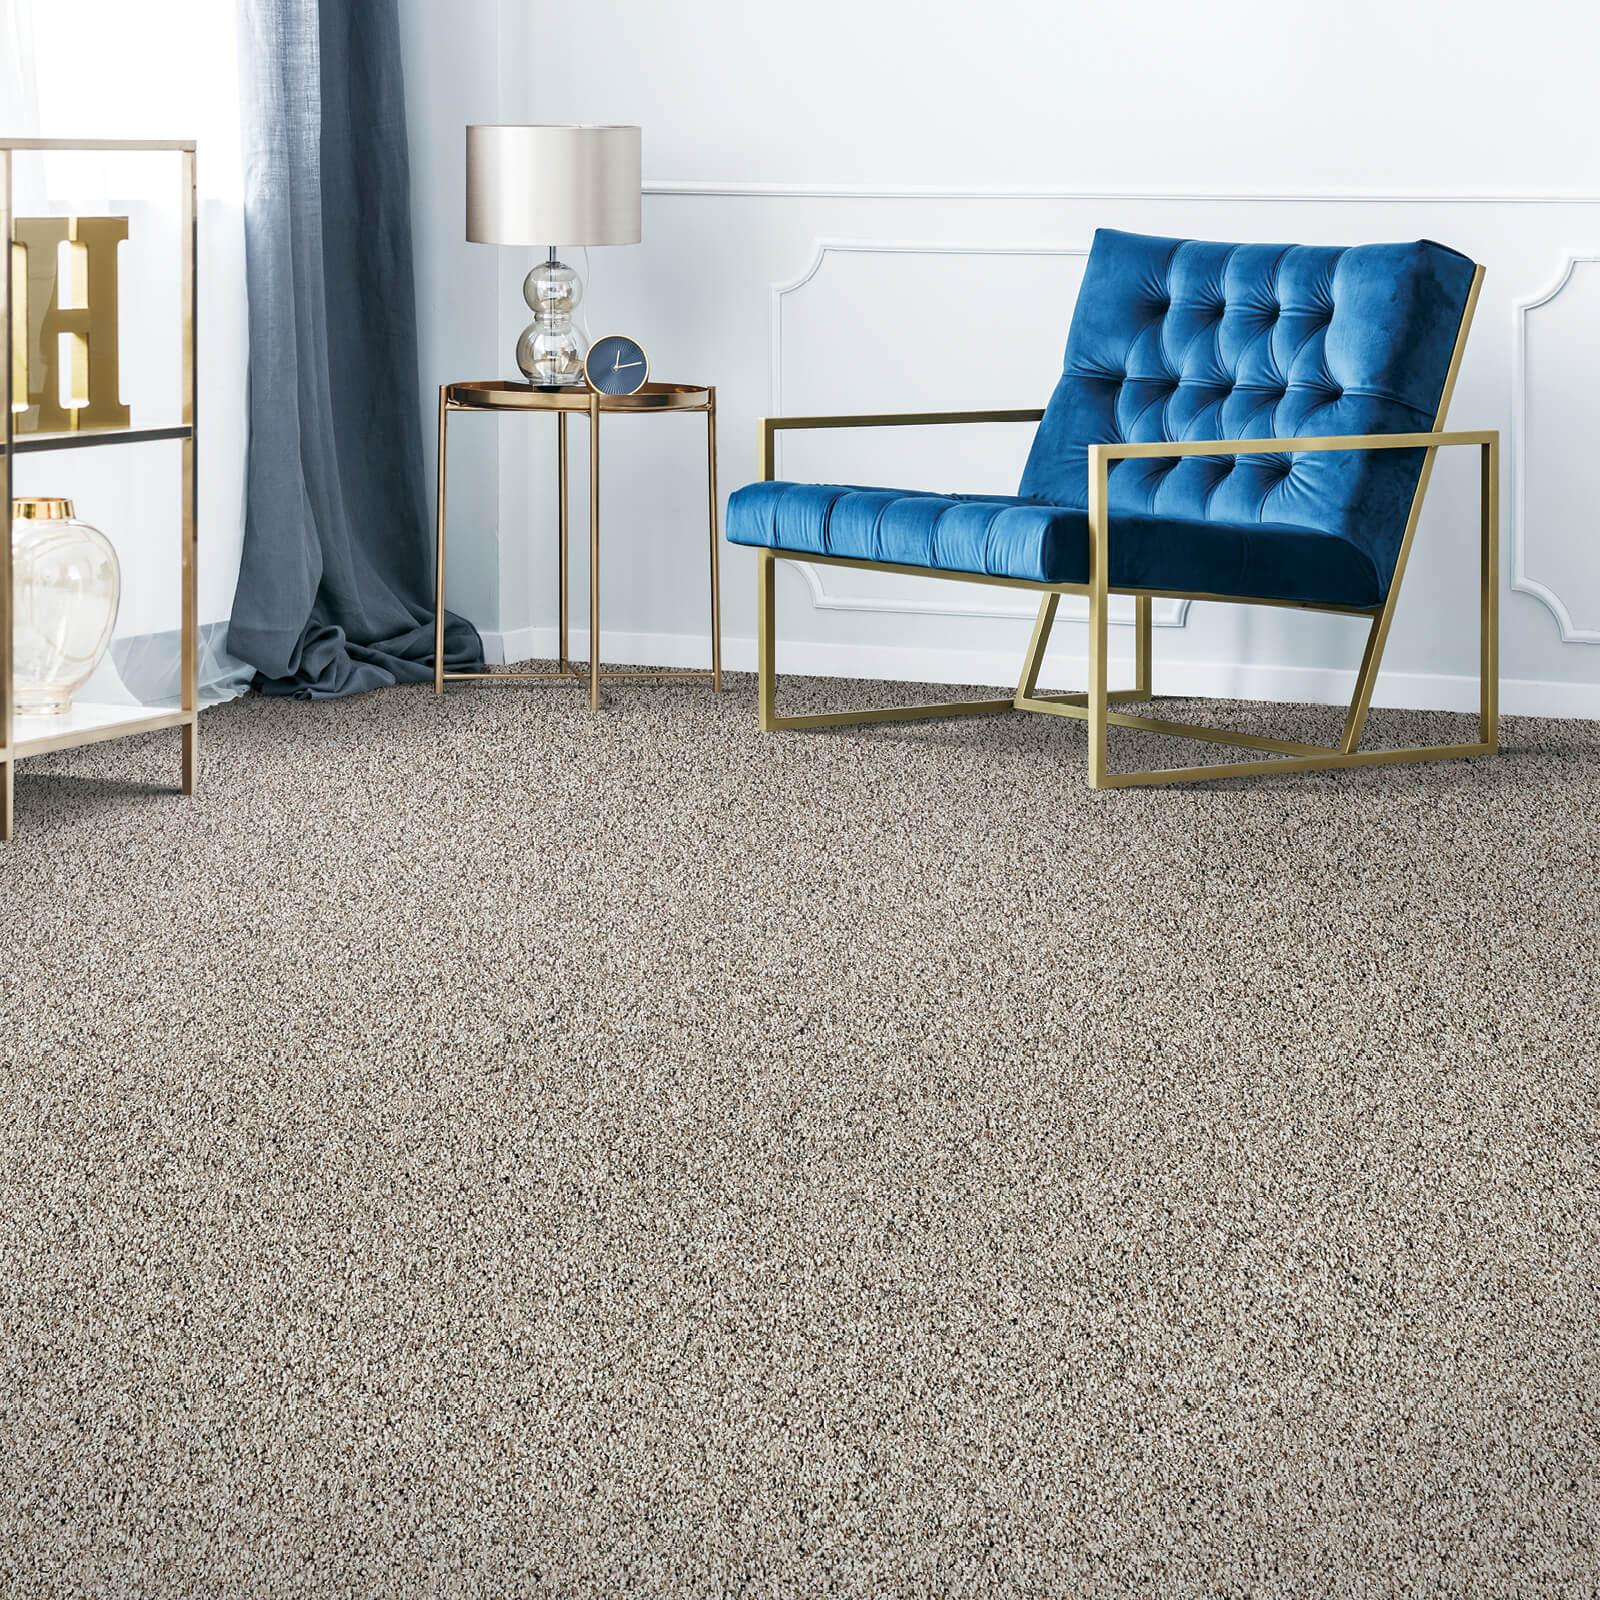 Carpet flooring with blue couch | Western States Flooring